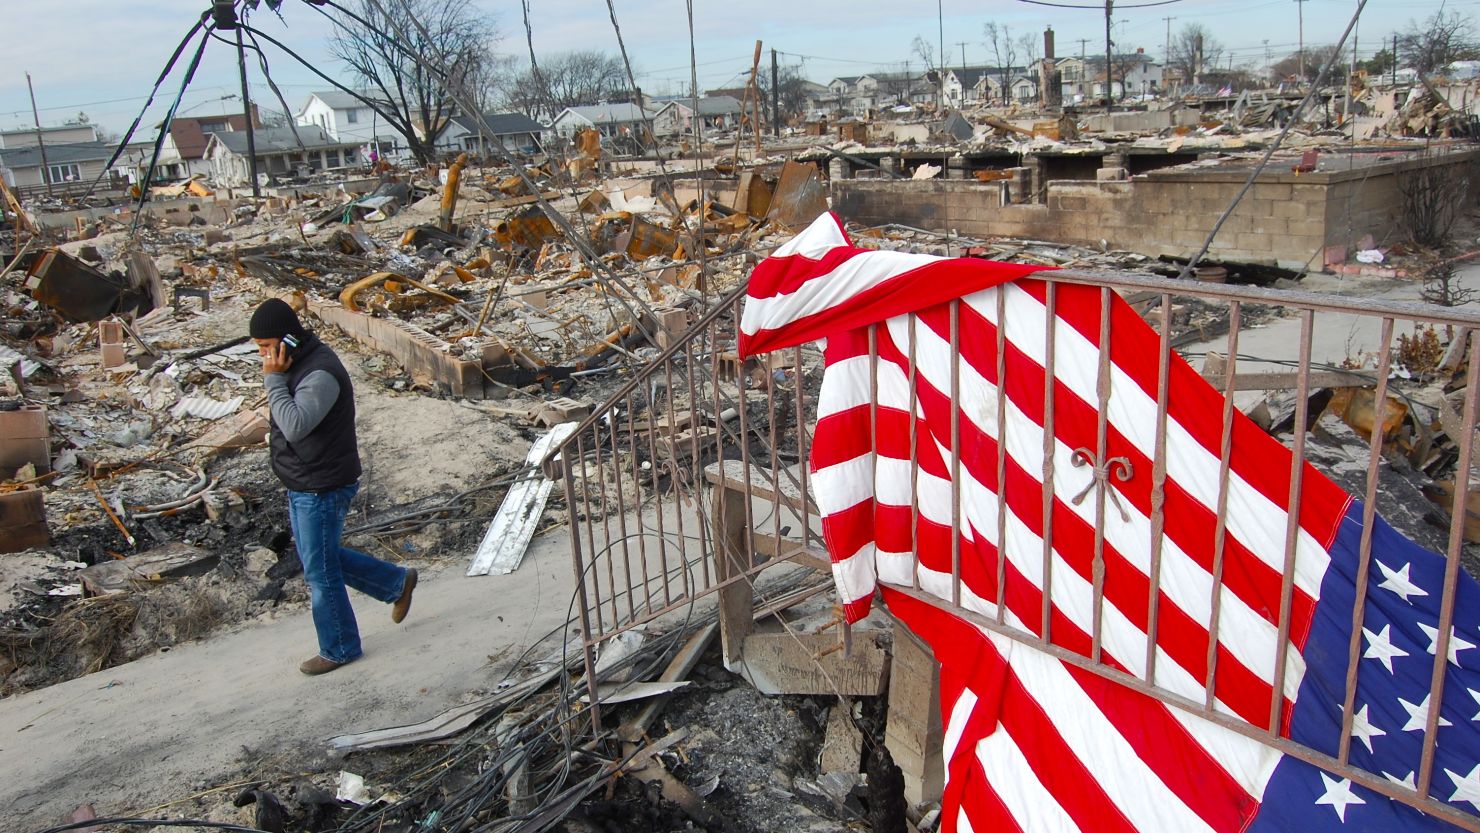 In the wake of Superstorm Sandy, a storm that ripped so much apart, people have come together to provide help and hope.